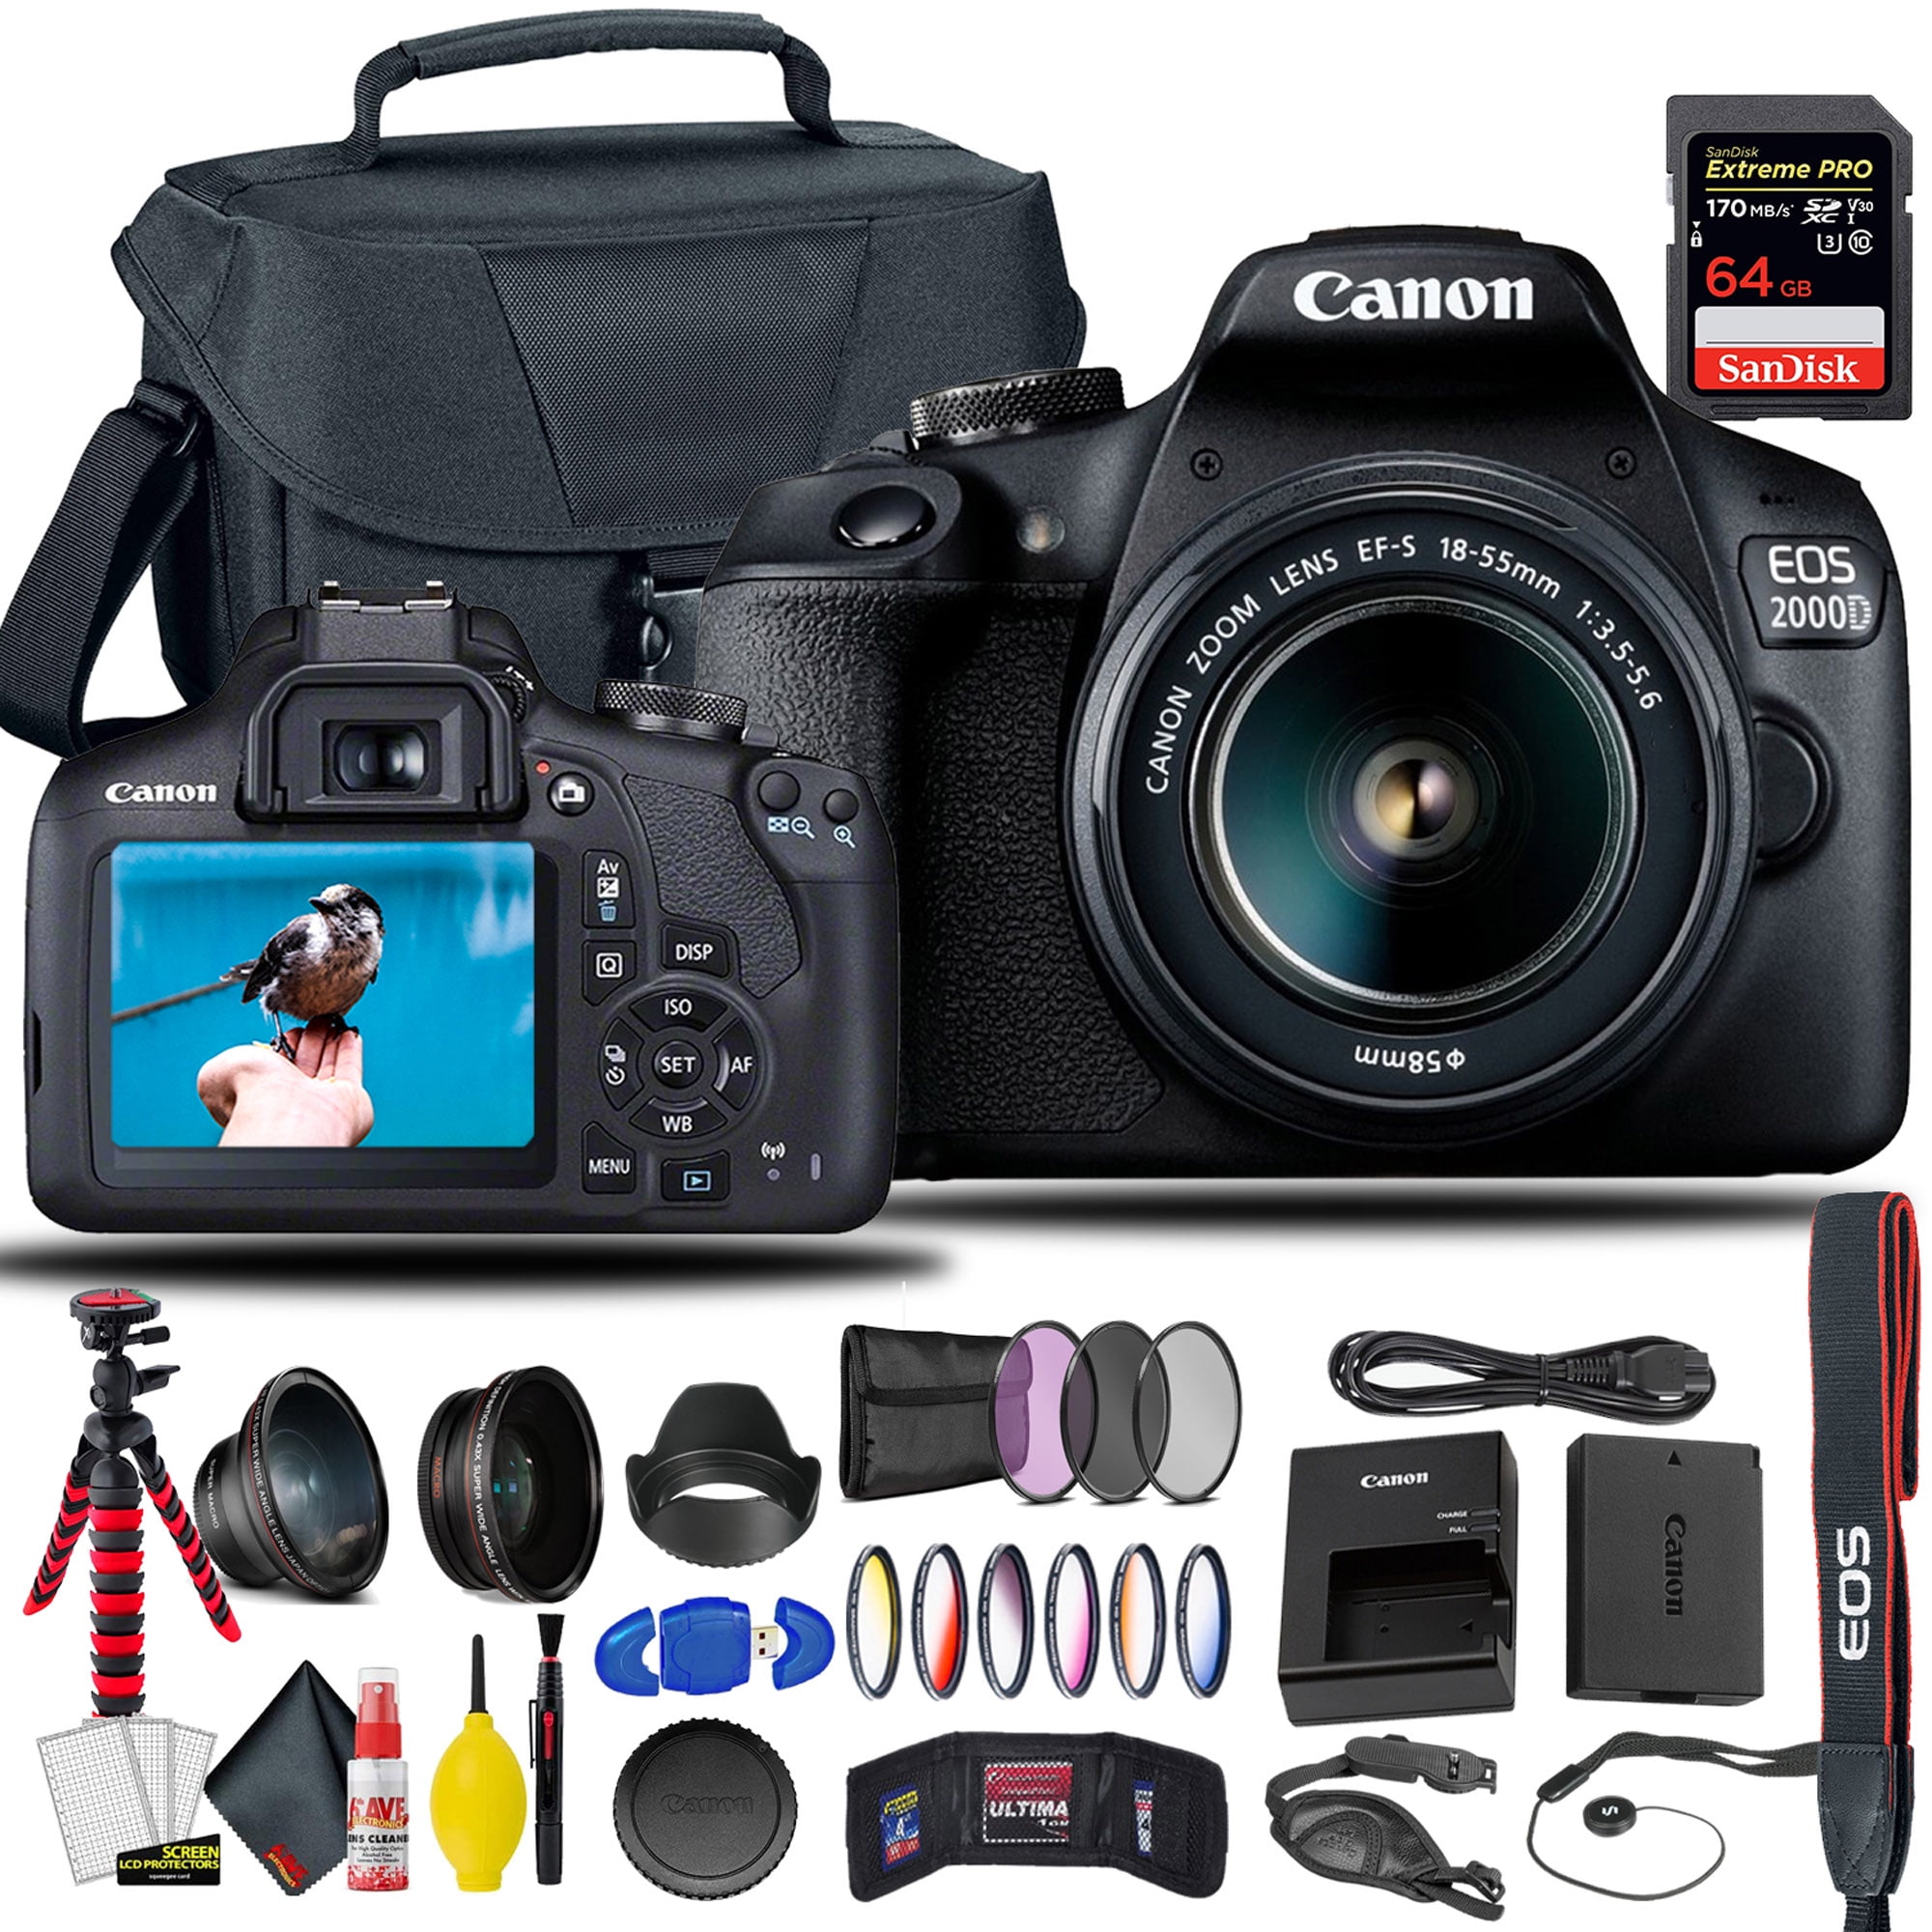 + with 128GB Tripod, More and EOS Flash, Bundle Camera f/3.5-5.6 DSLR 18-55mm Zoom 2000D Rebel + T7 Canon 20pc Card, Lens